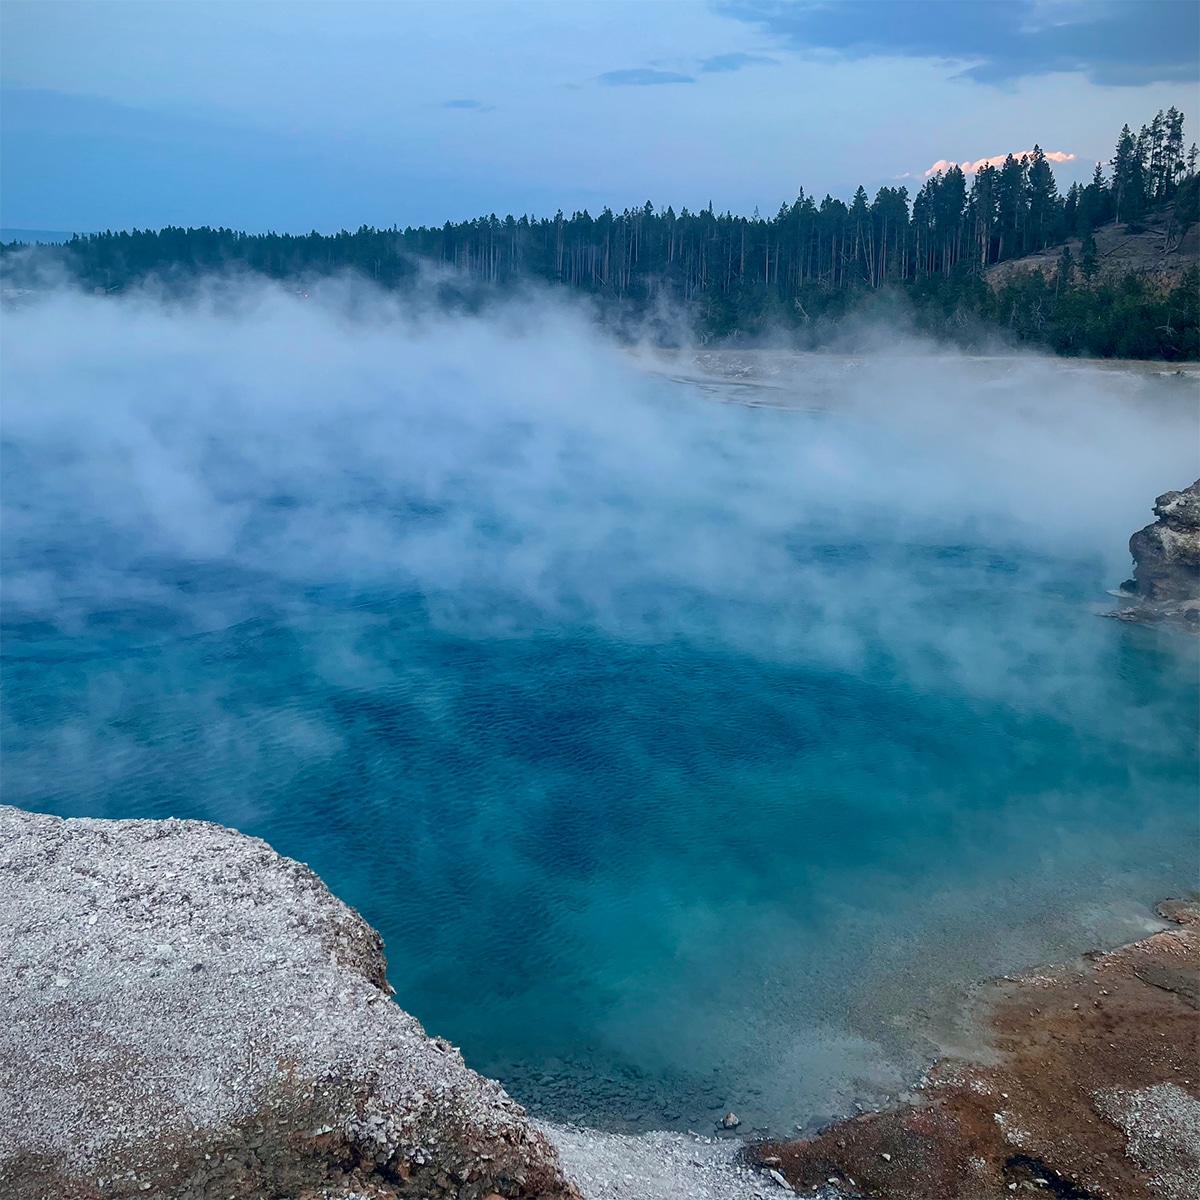 Steam rising from the water at a hot springs in Yellowstone National Park.